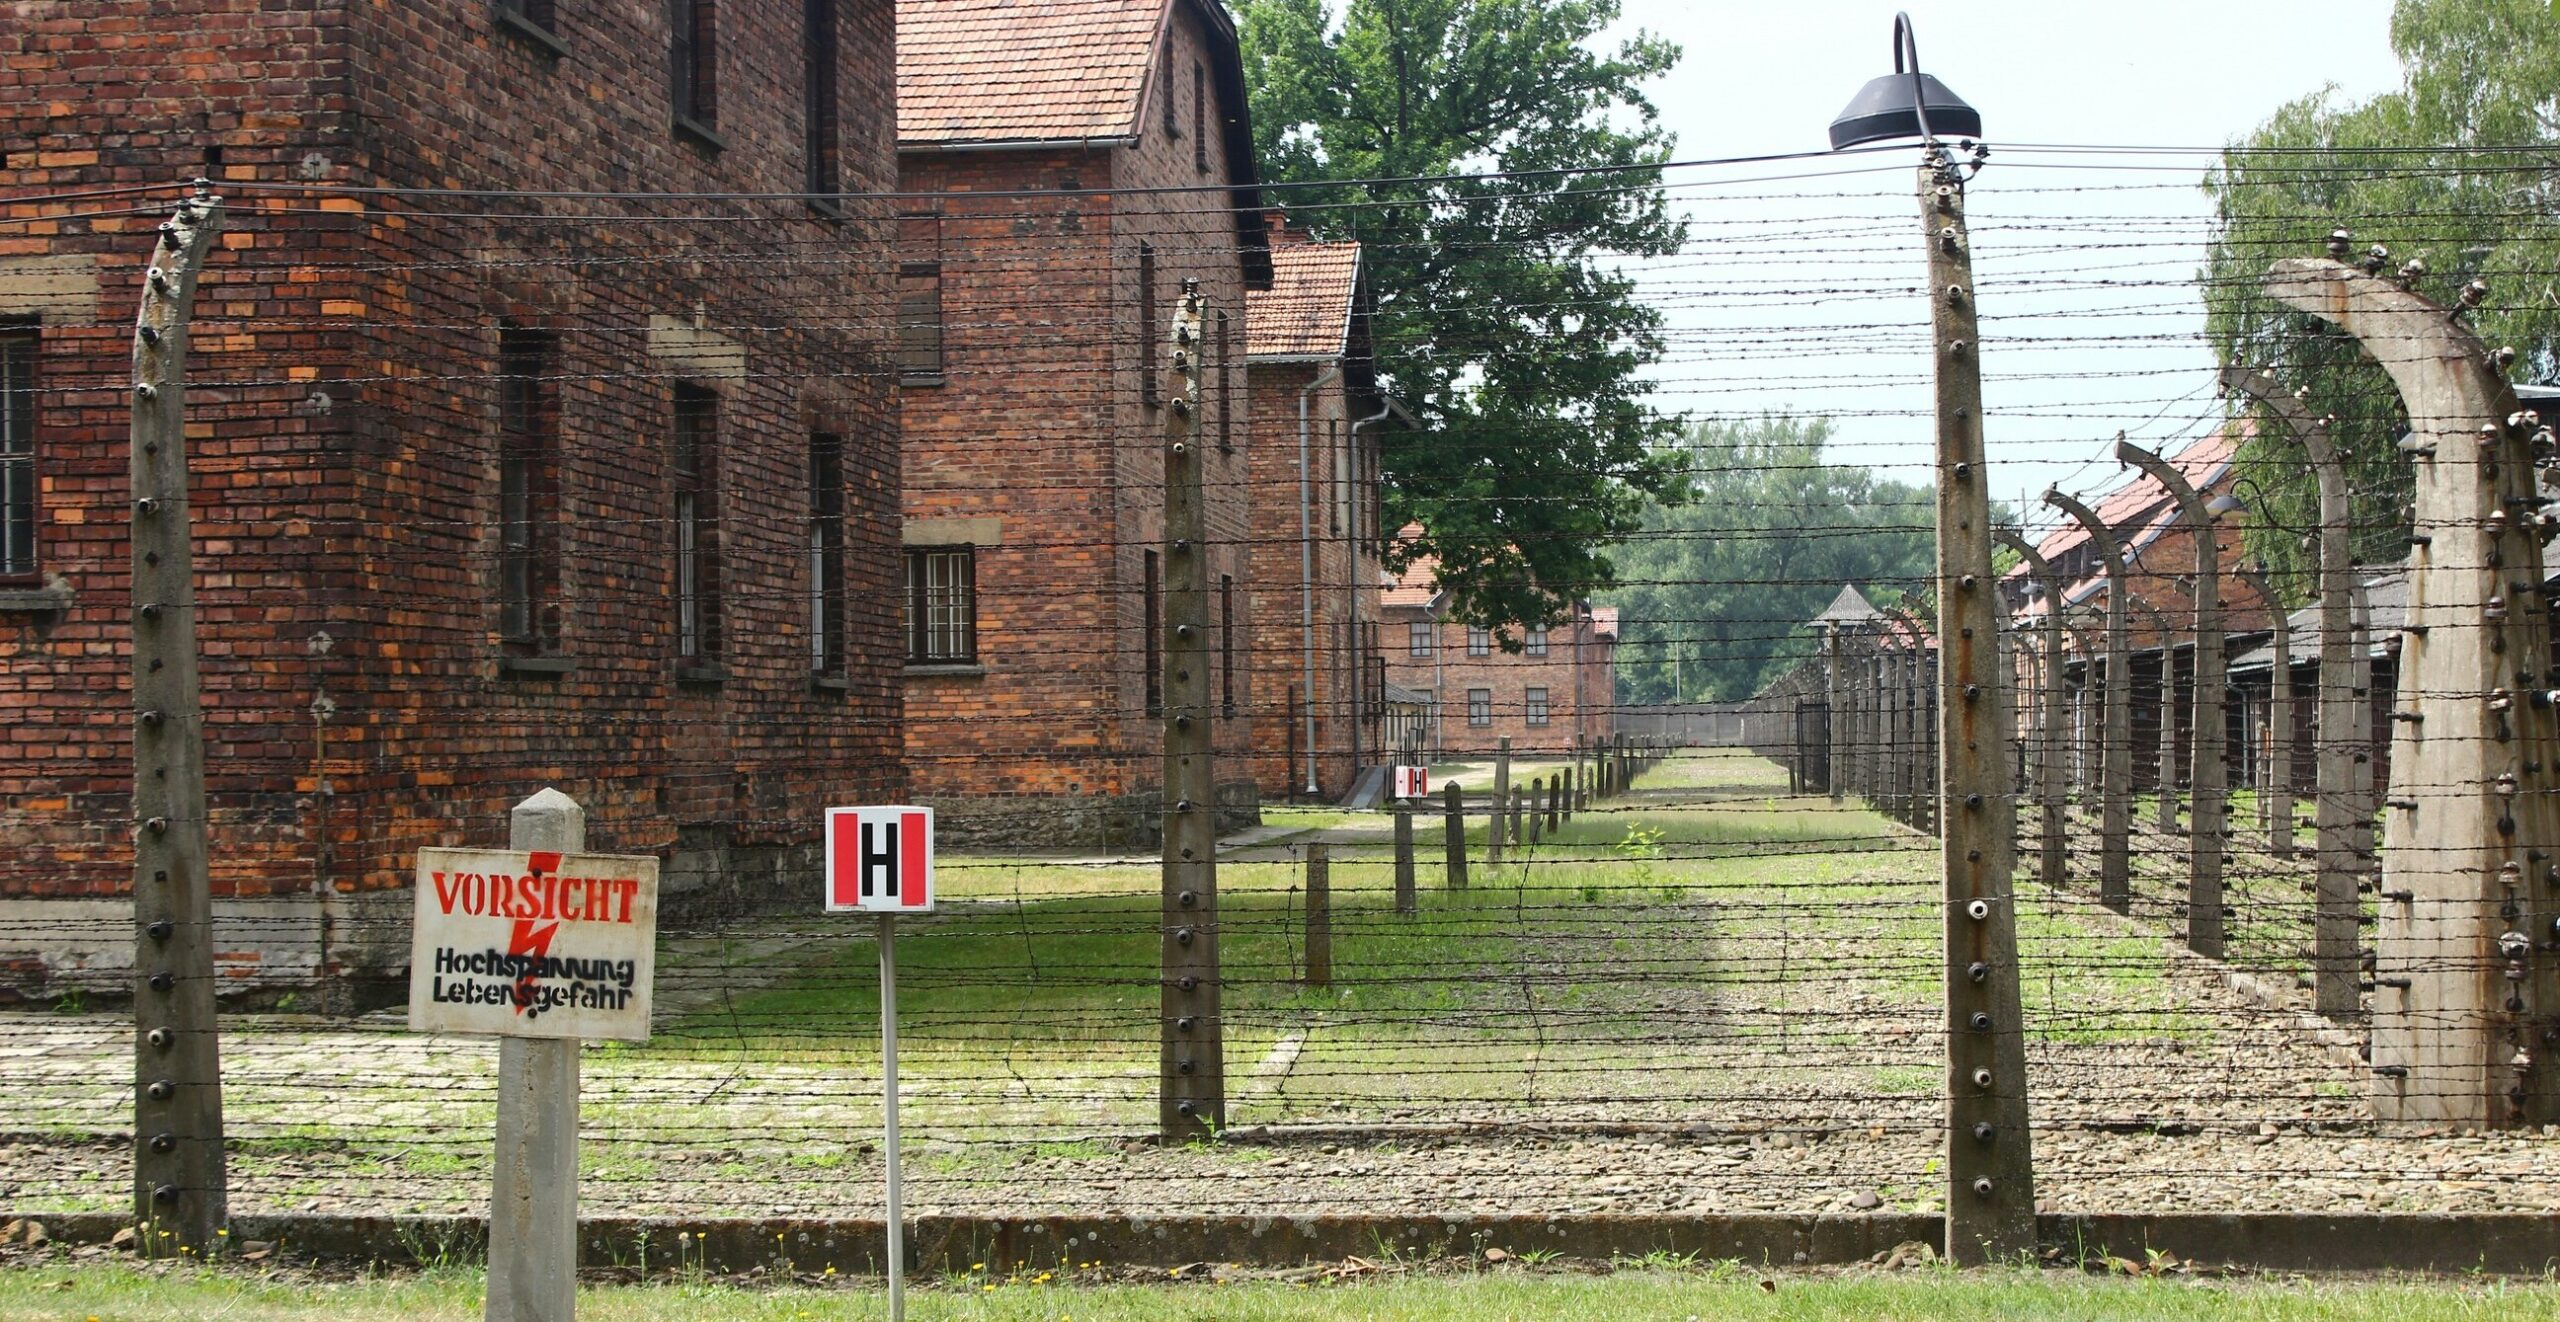 Facebook apologises for flagging Auschwitz Museum’s posts as violating...